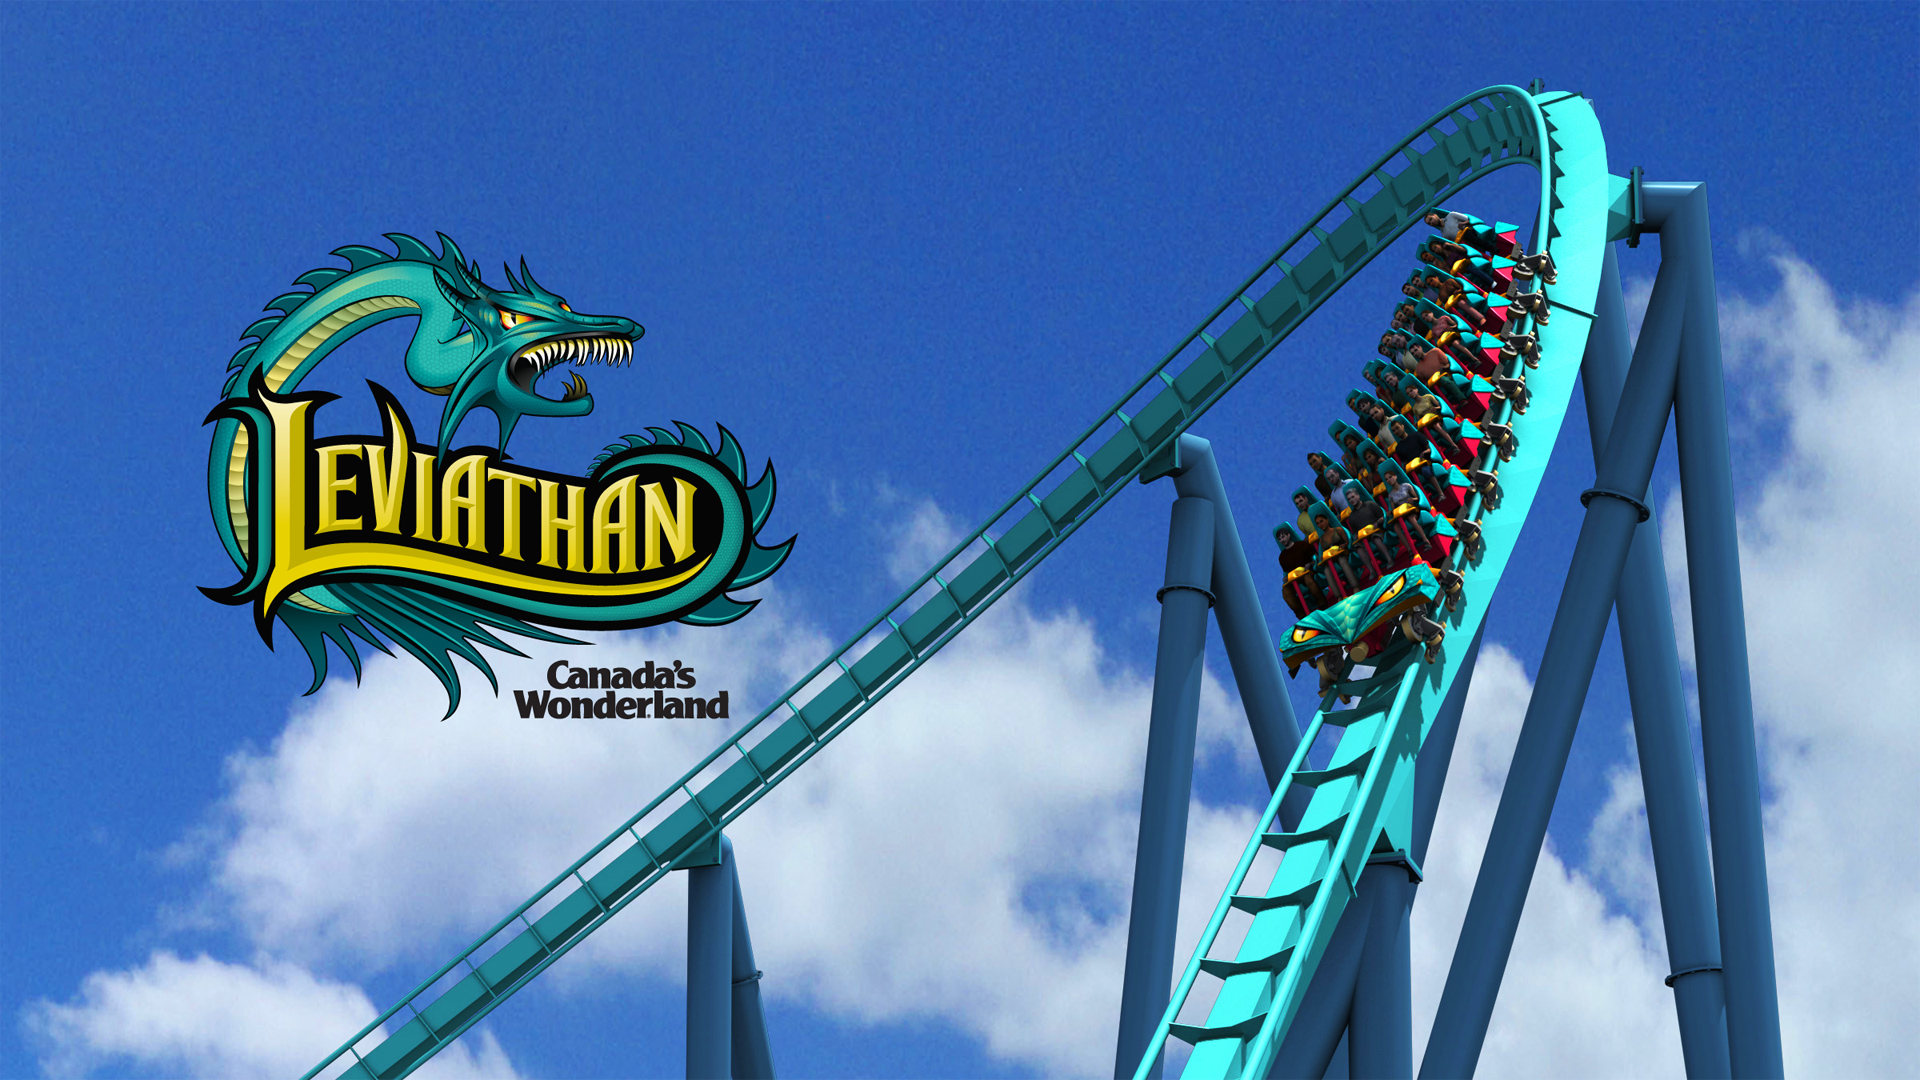 This Roller Coaster Desktop Background Wallpaper Can Be Used On